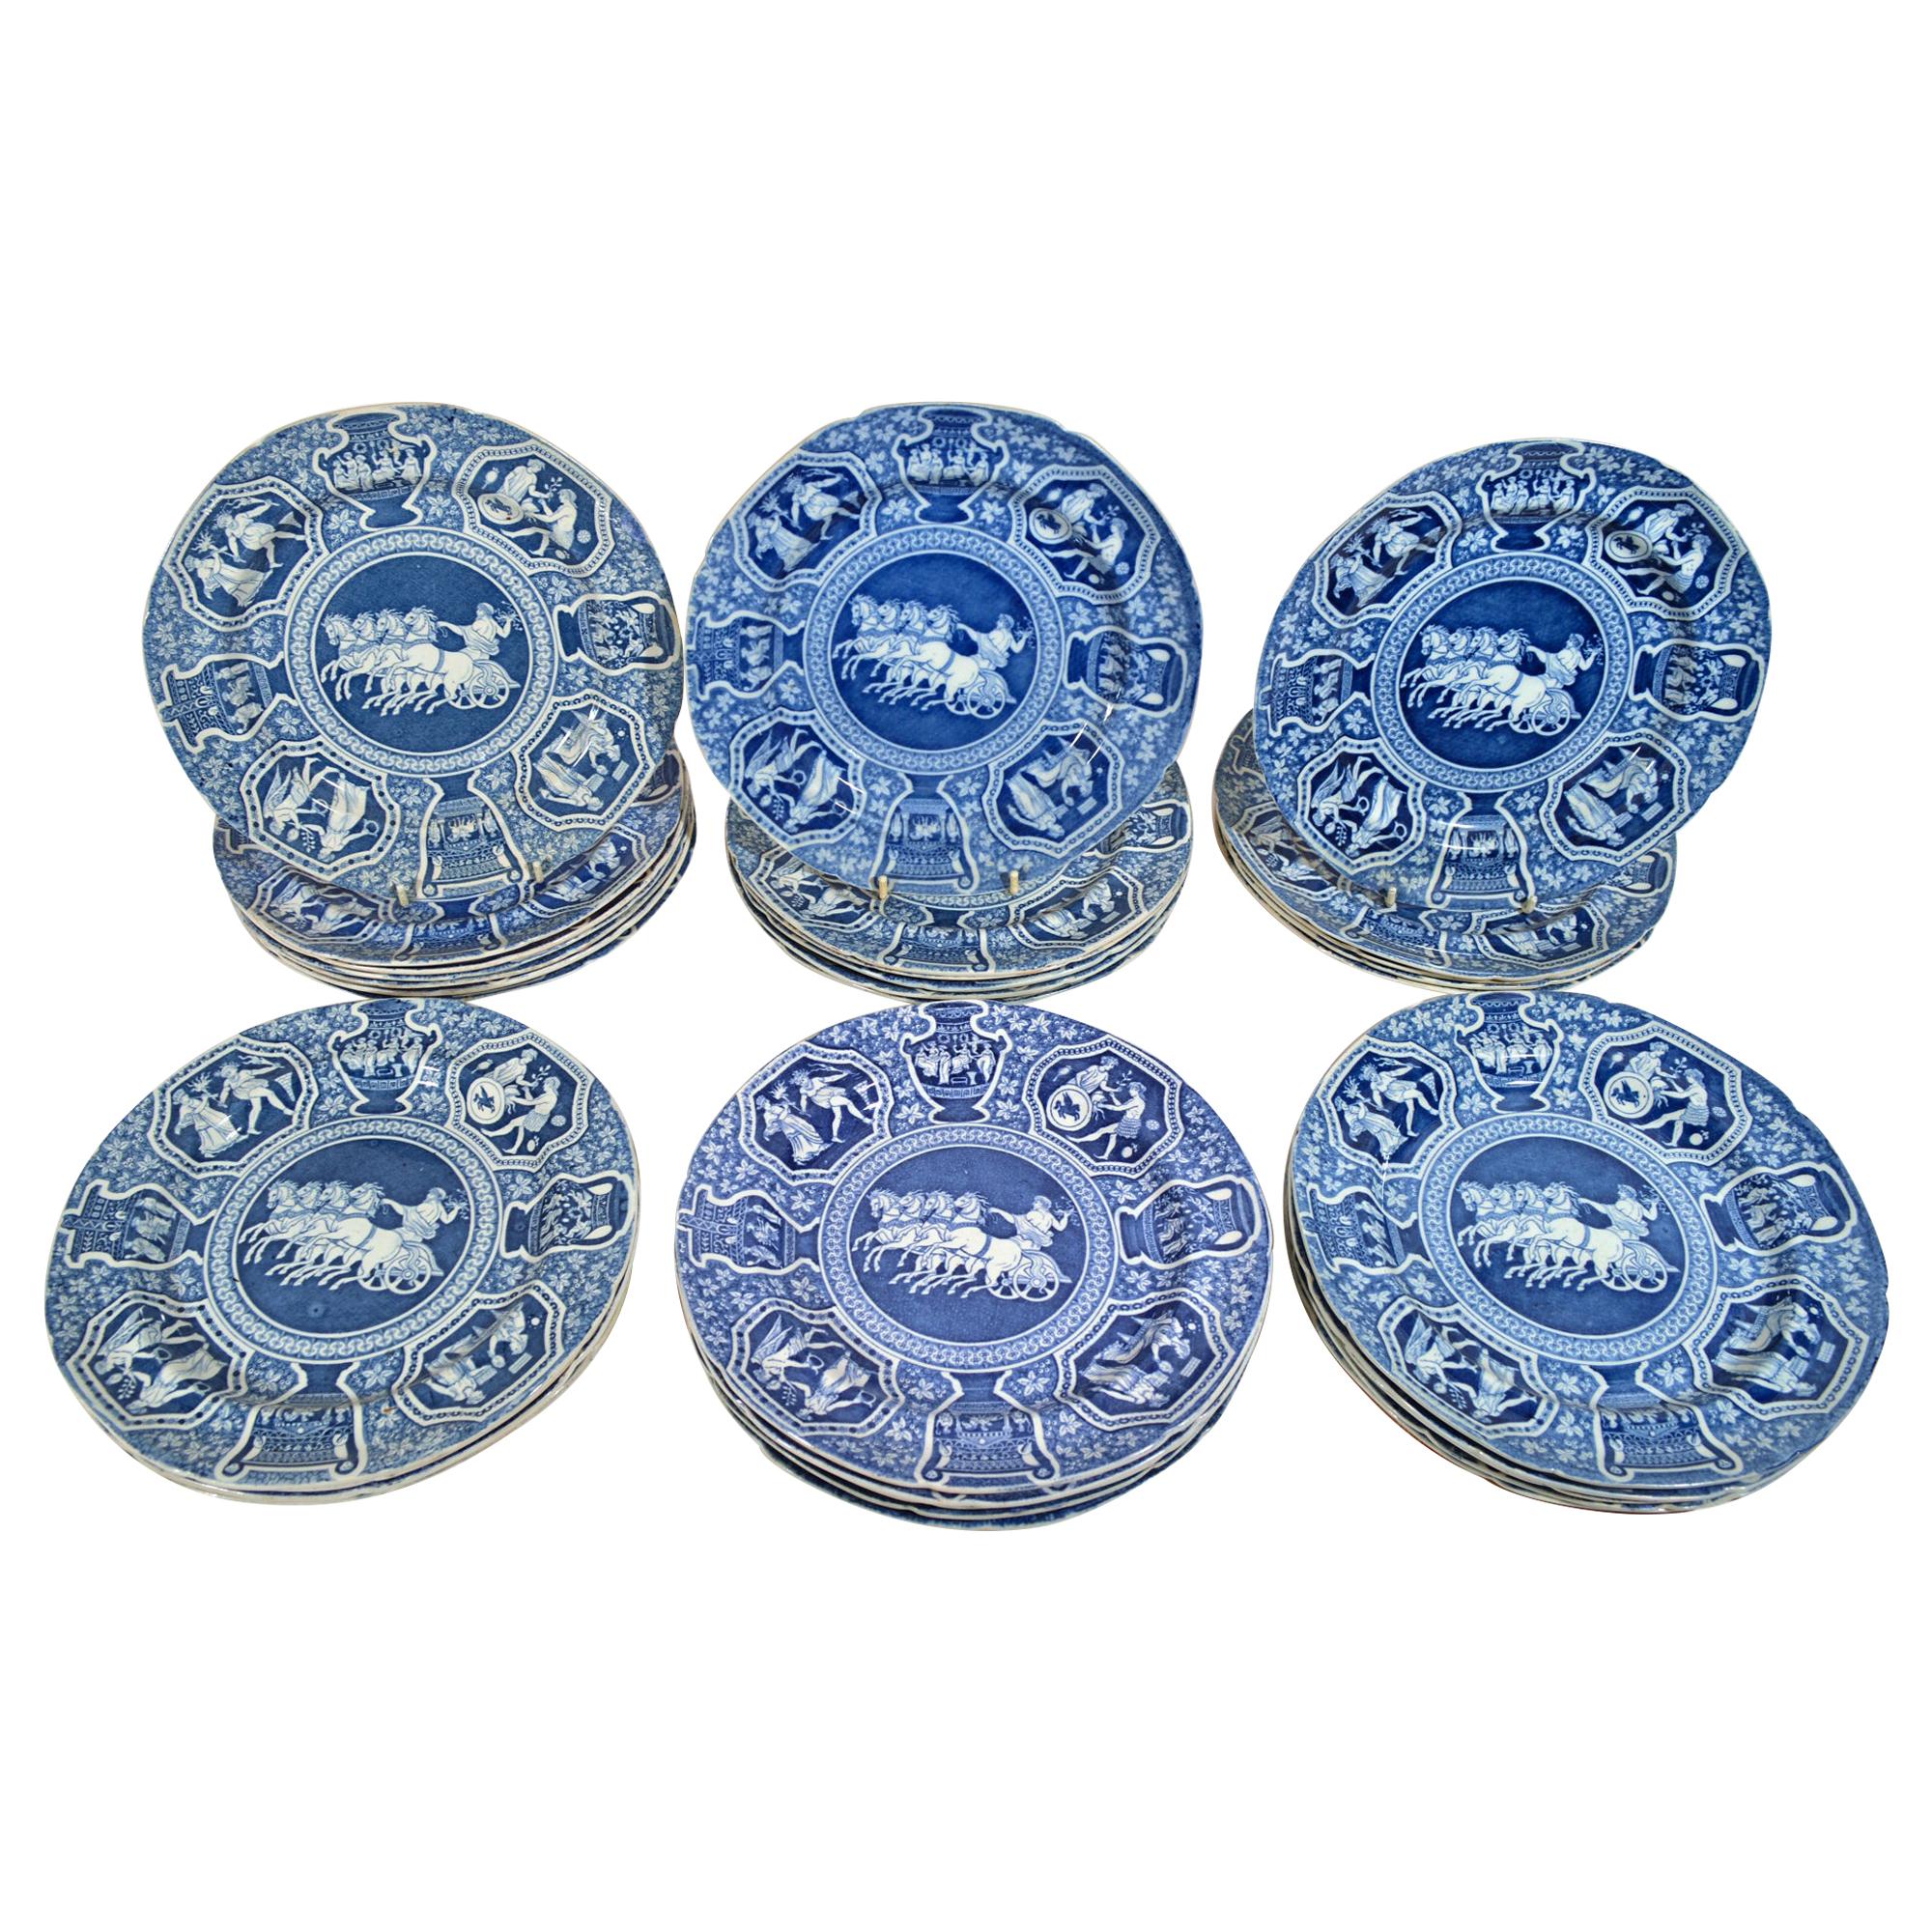 Spode Pottery Neo-Classical Greek Pattern Blue Set of Dinner Plates-33 Plates